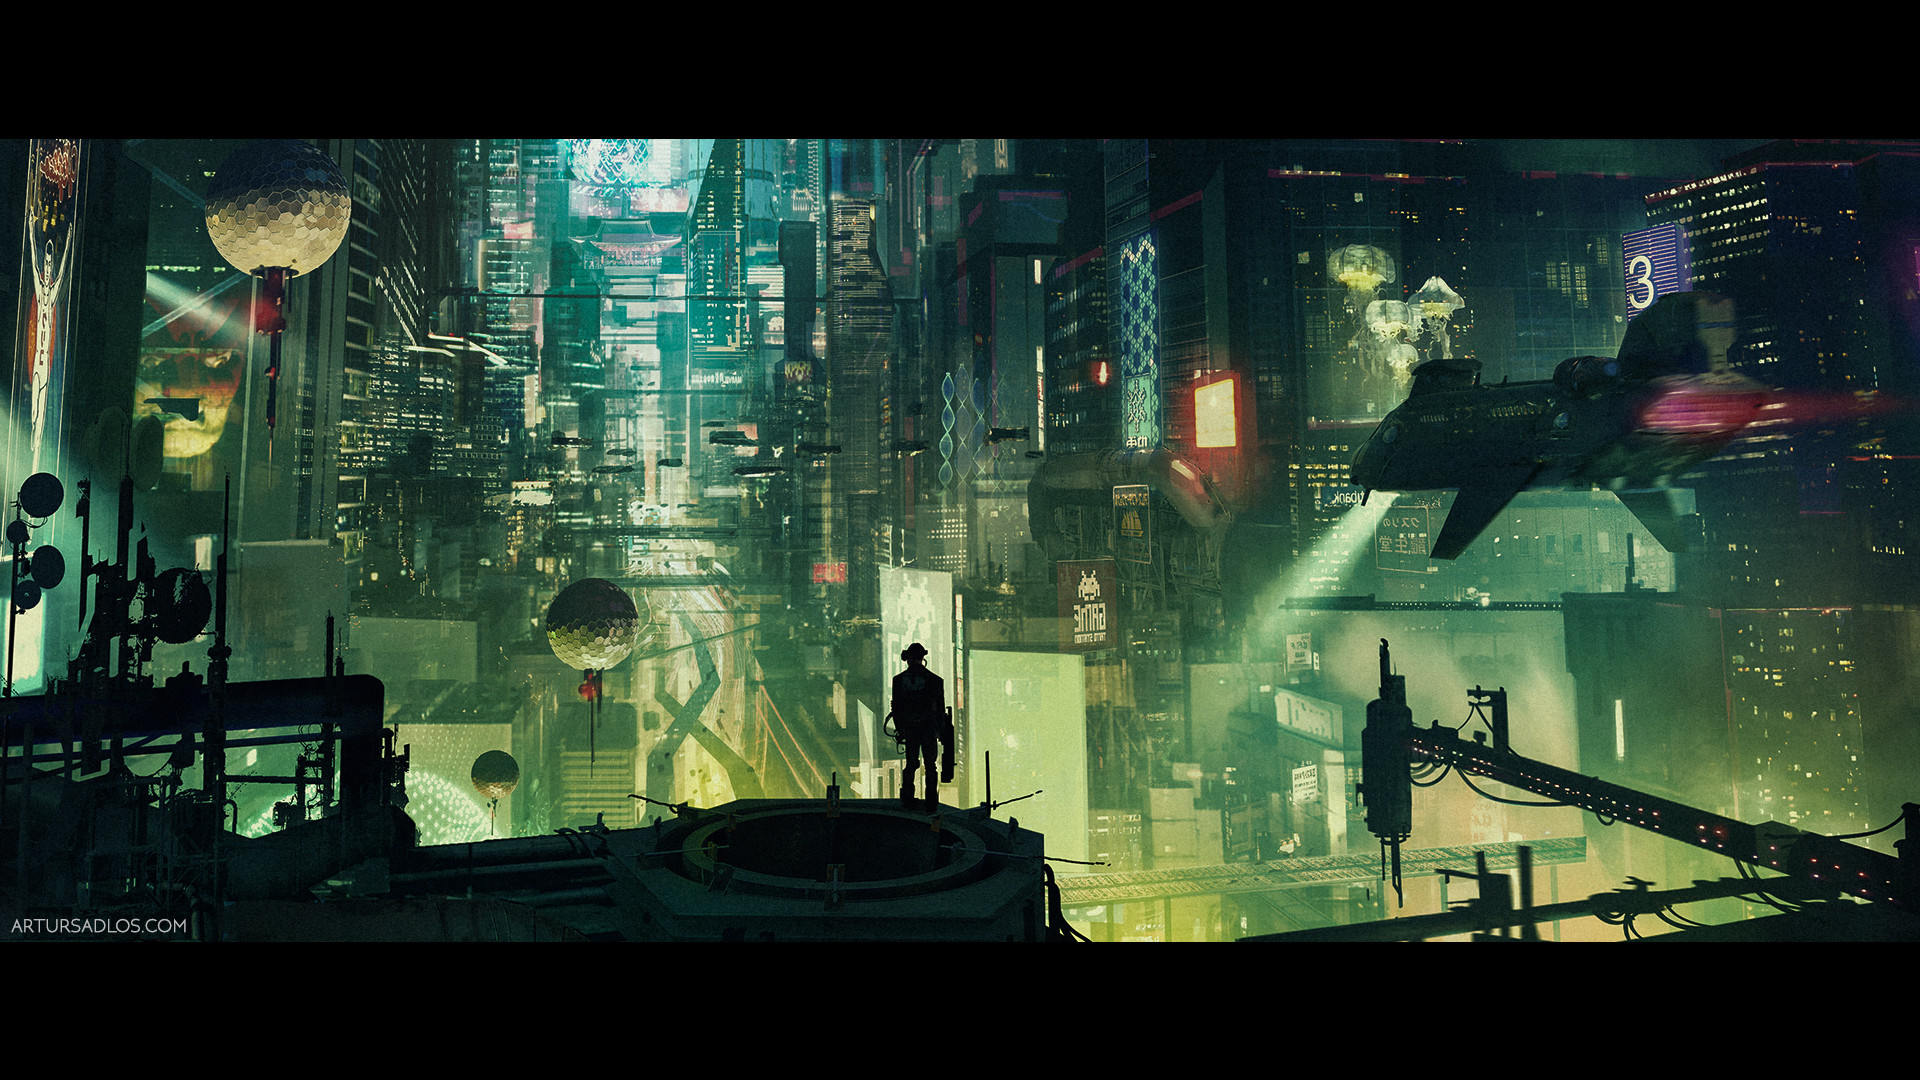 ArtStation - Commission Cyberpunk City With Nature Elements